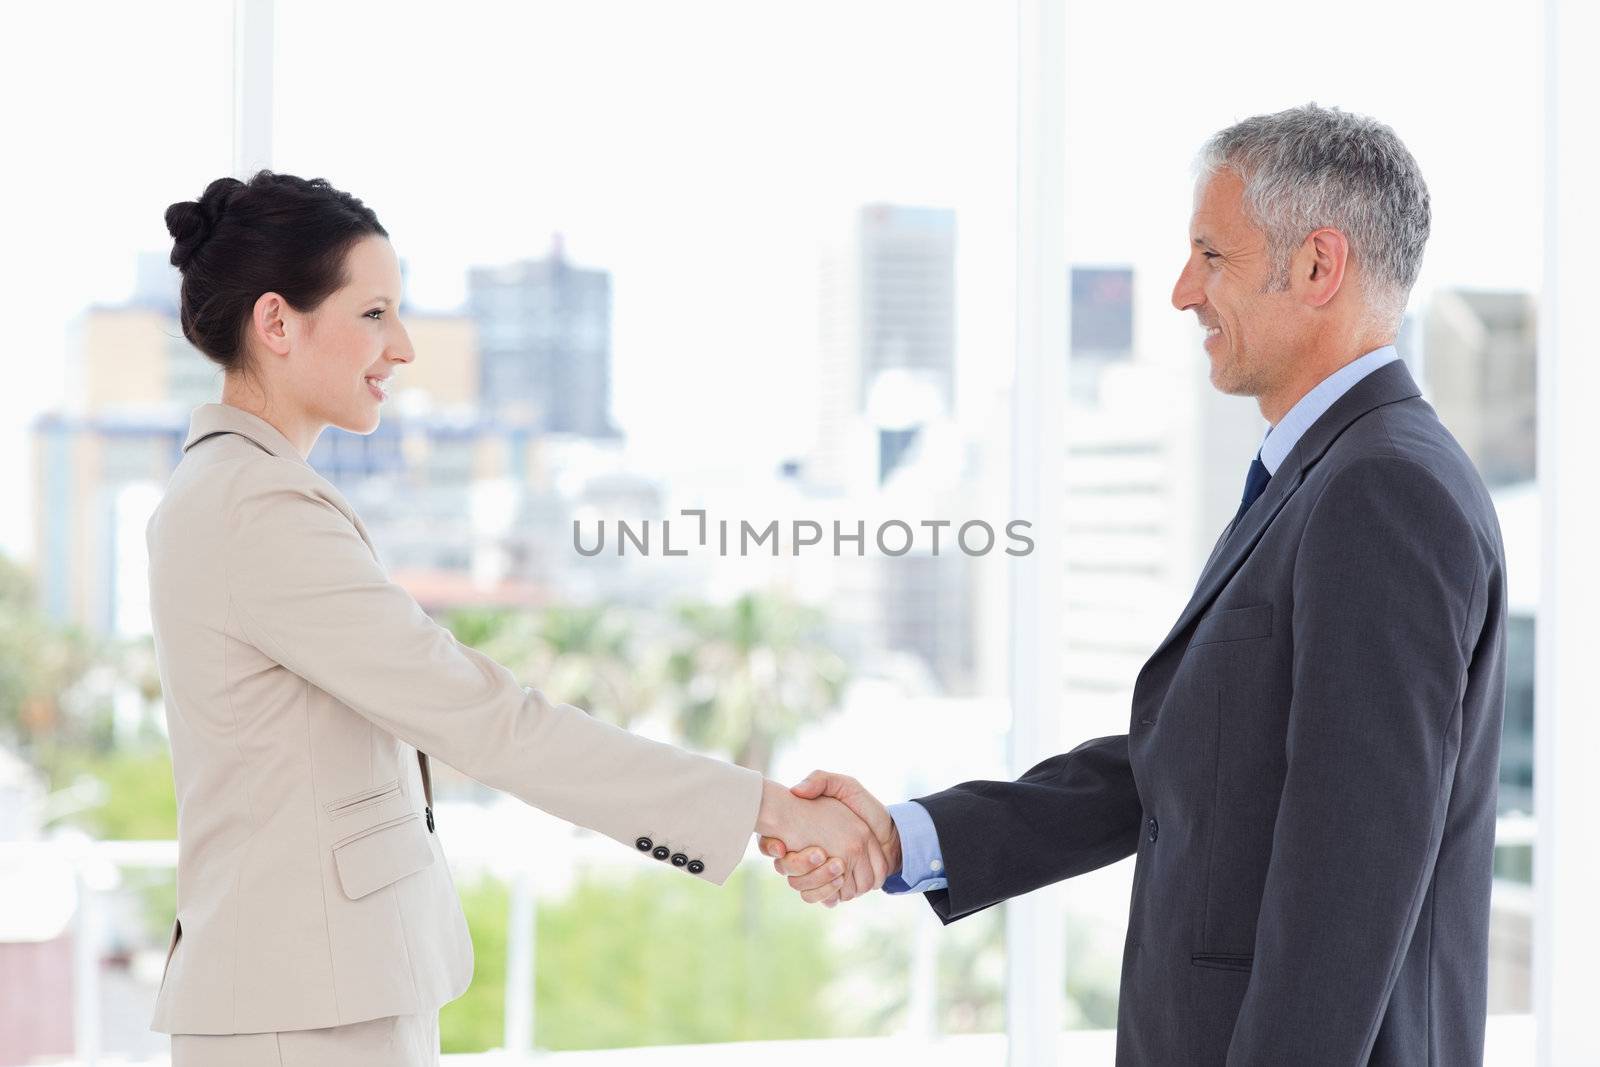 A mature director and his younger secretary shaking hands while smiling